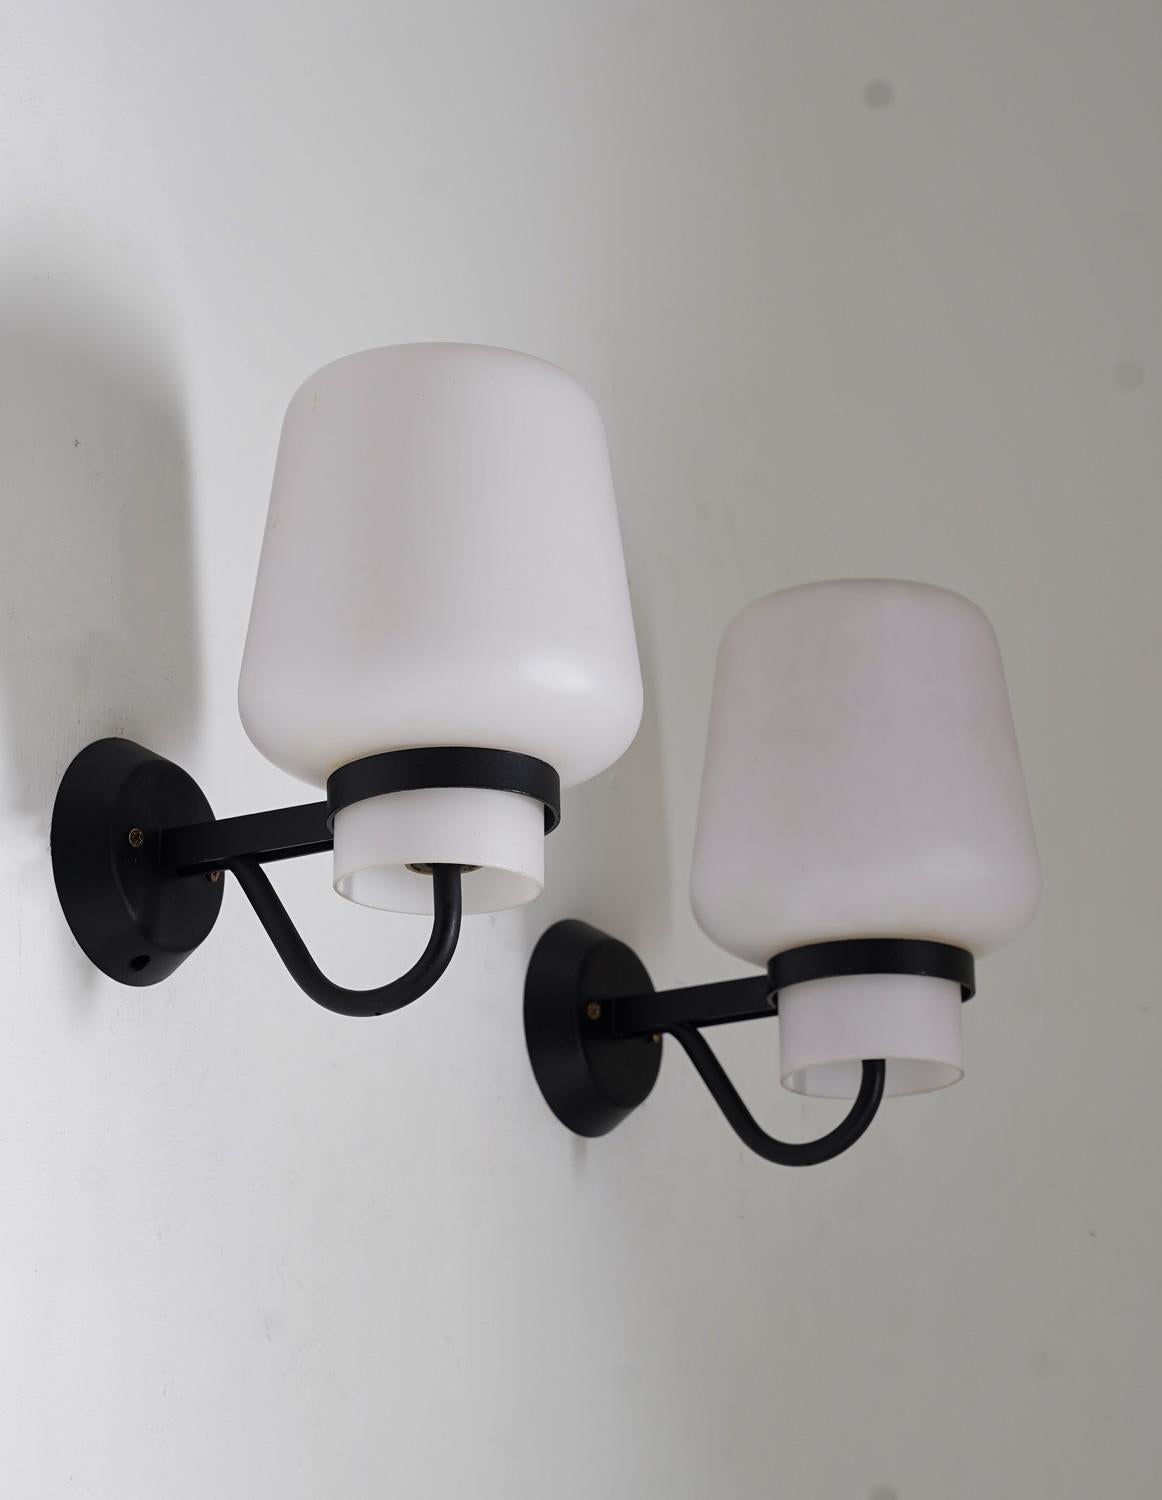 Large wall lamps by ASEA, 1960s.
These lamps feature a large frosted opaline glass shade, resting on a frame of iron.

Condition: Good condition, the frames have been re-laquered at some point